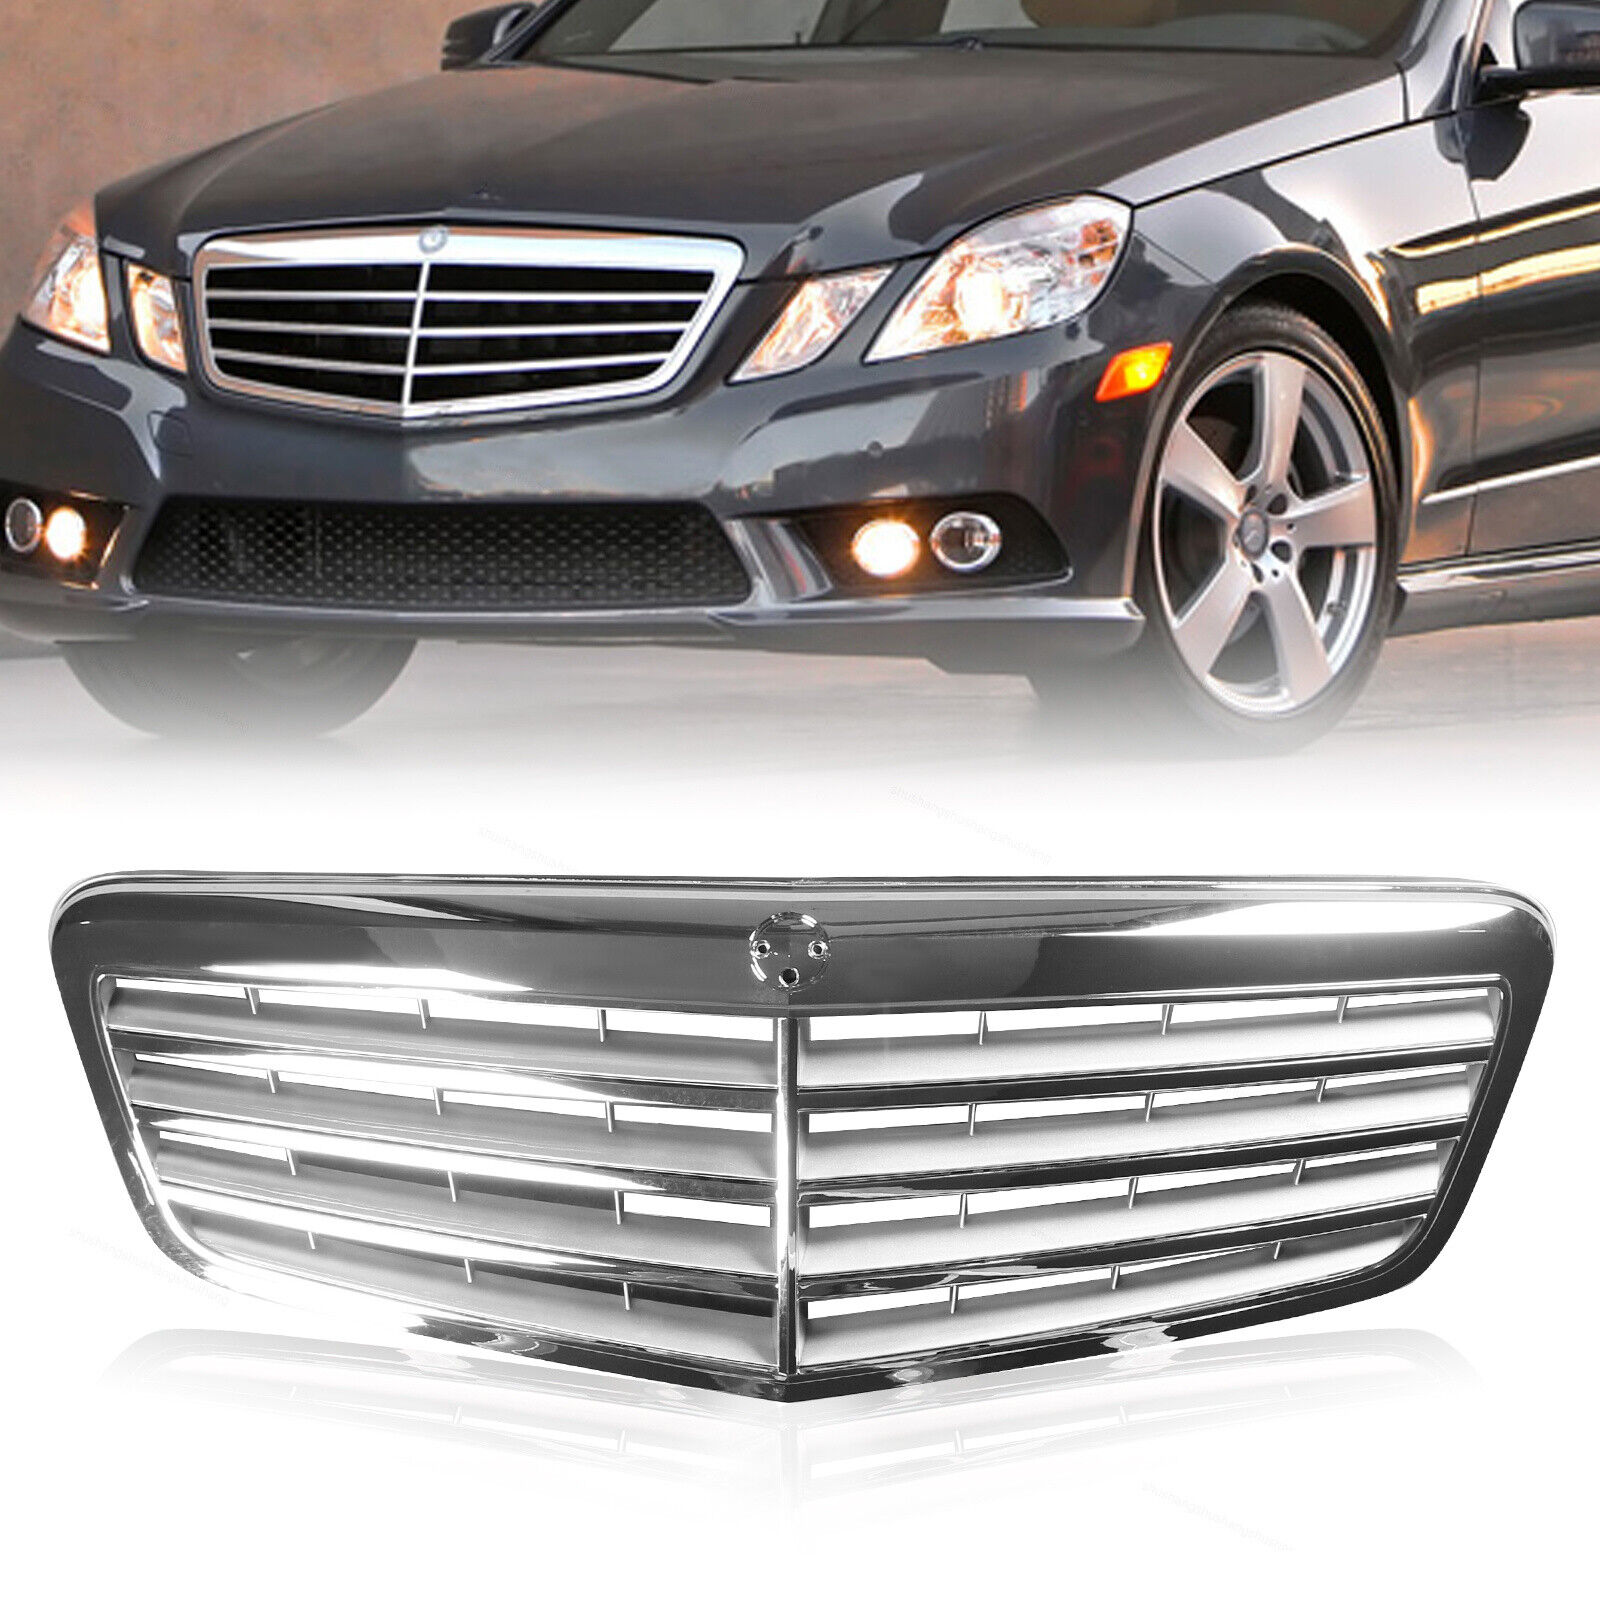 Fits 2010 2012 2013 Mercedes Benz E350 E400 Front Upper Grille Hood Grill Chrome